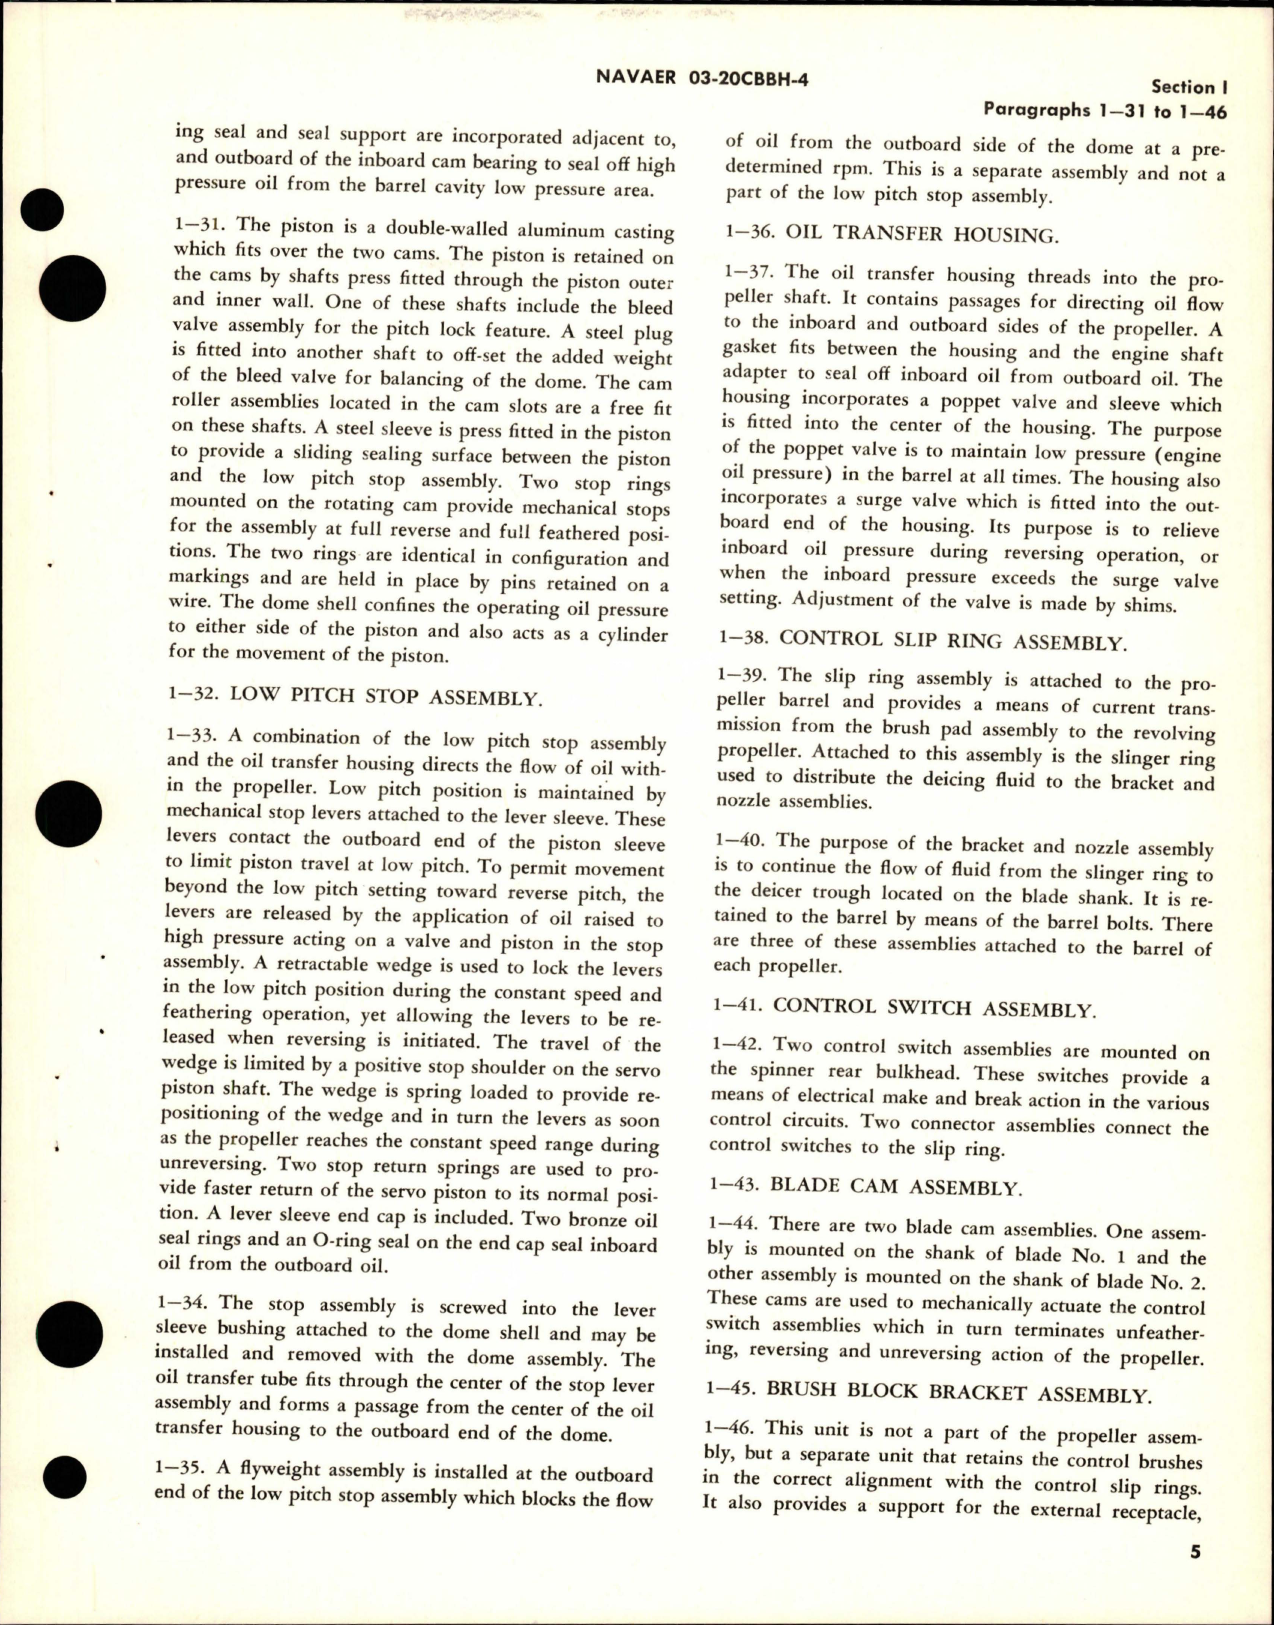 Sample page 9 from AirCorps Library document: Operation and Maintenance Instructions for Variable Pitch Propeller - Model 43H60-359 and 43H60-383